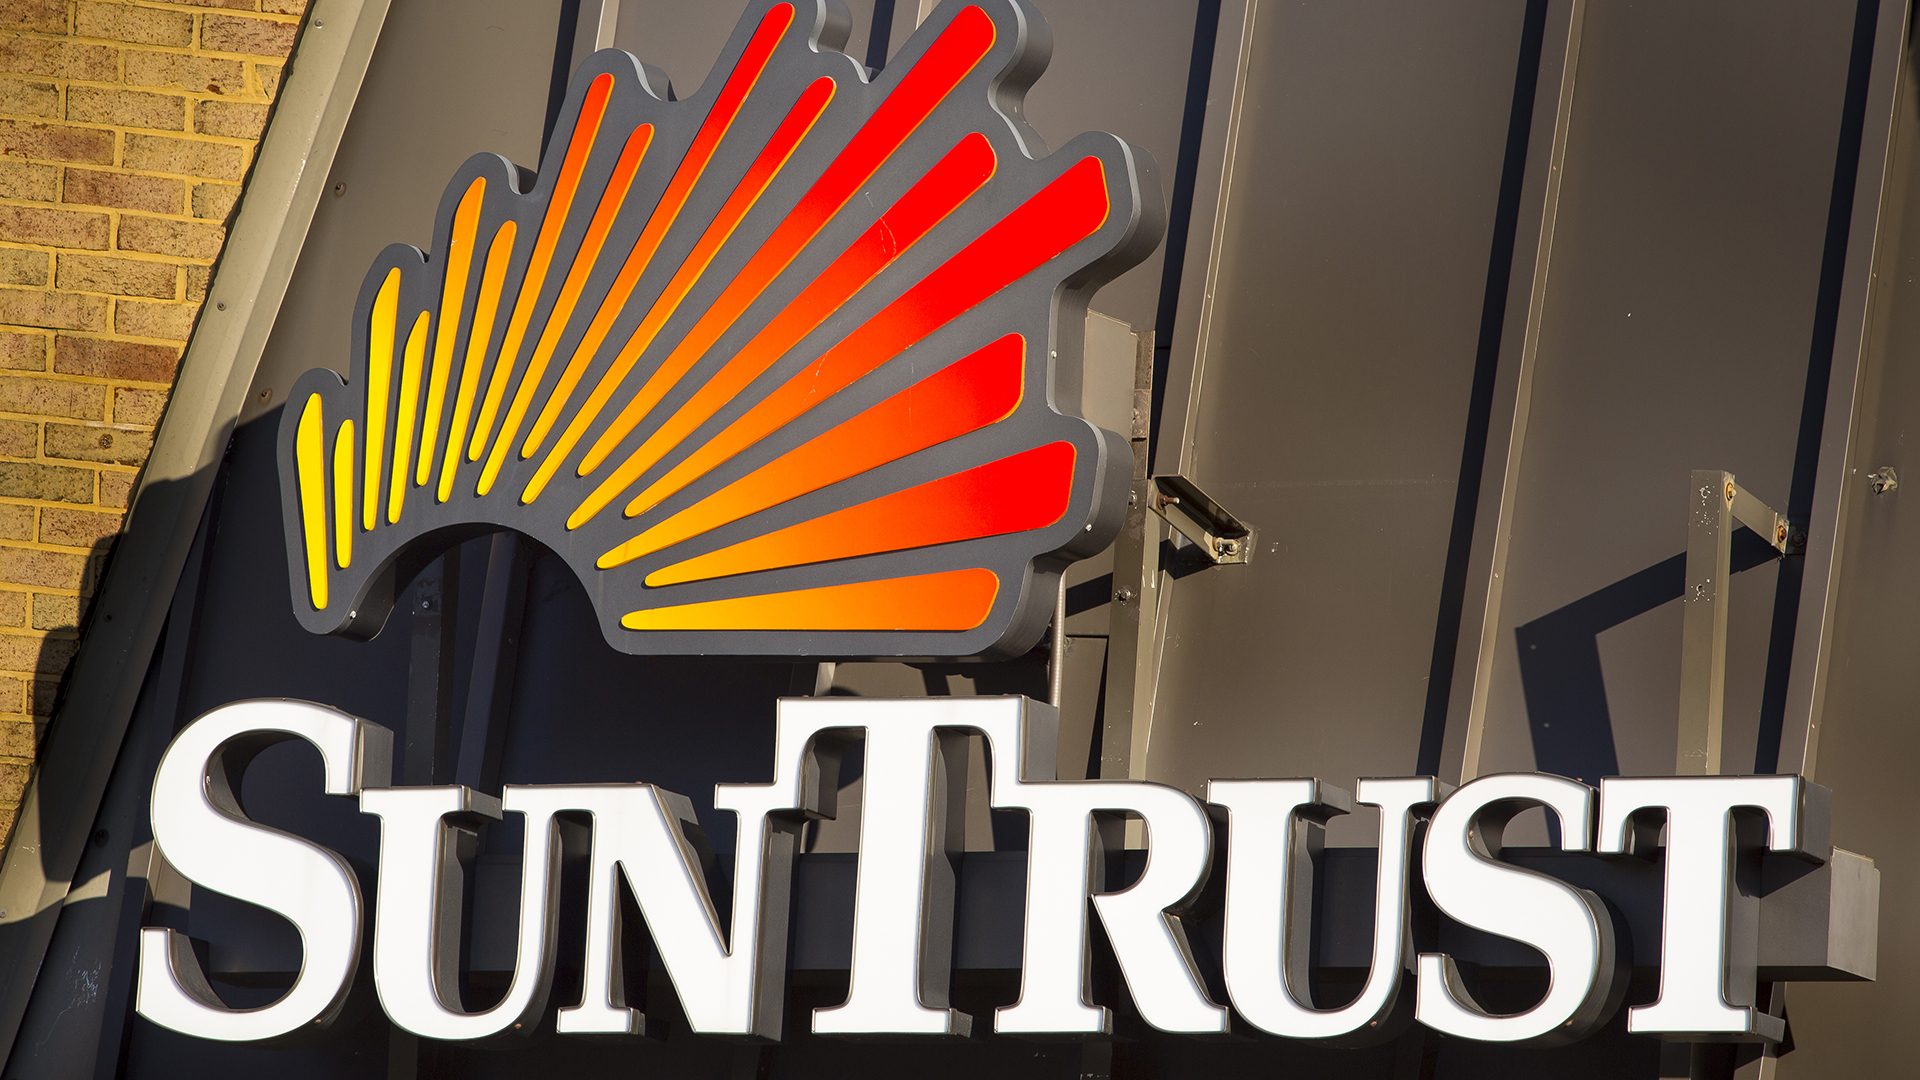 Here S Your Suntrust Routing Number Gobankingrates